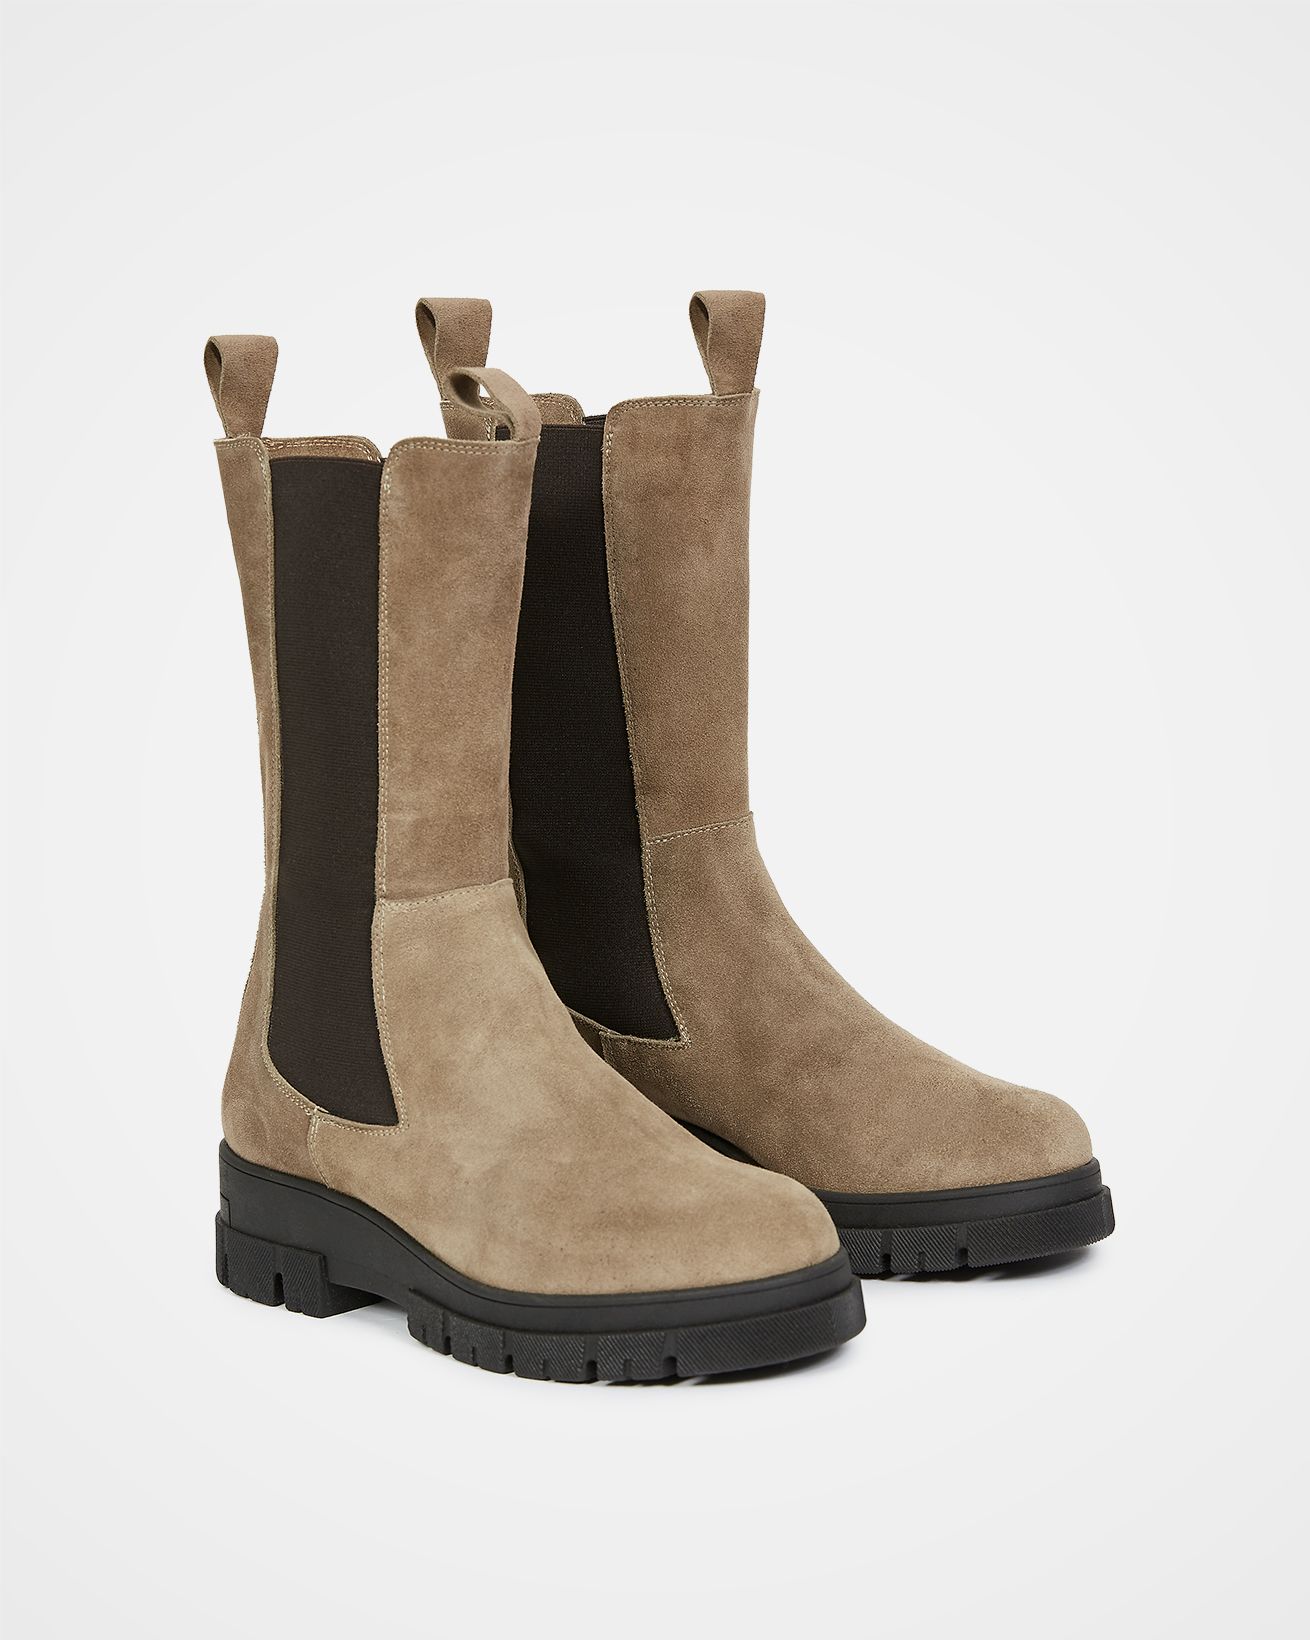 7842_chunky-tall-chelsea-boot_taupe-suede_pair_web.jpg